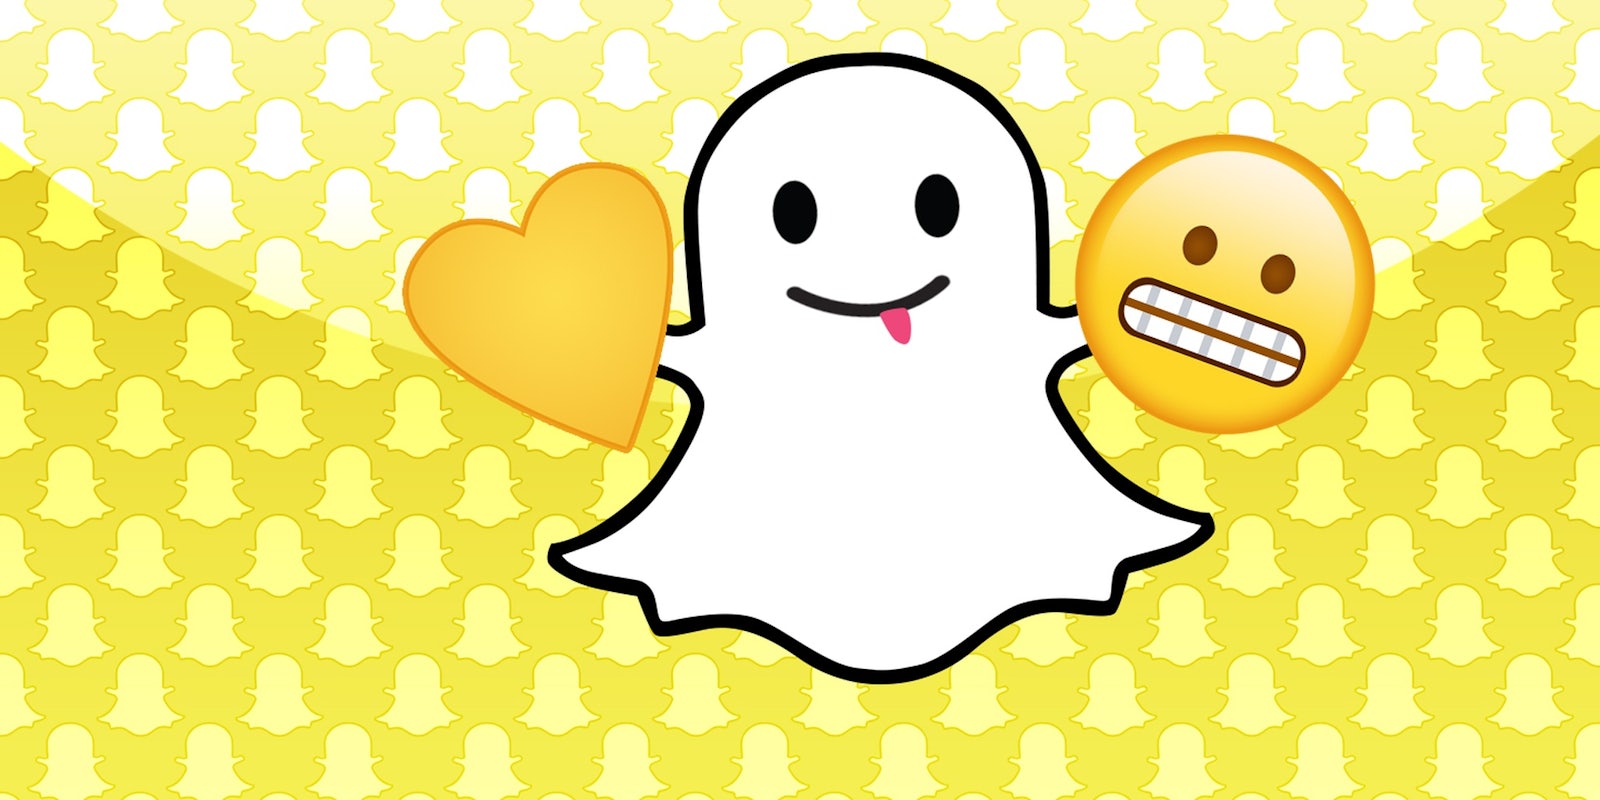 snapchat emojis: what do they mean